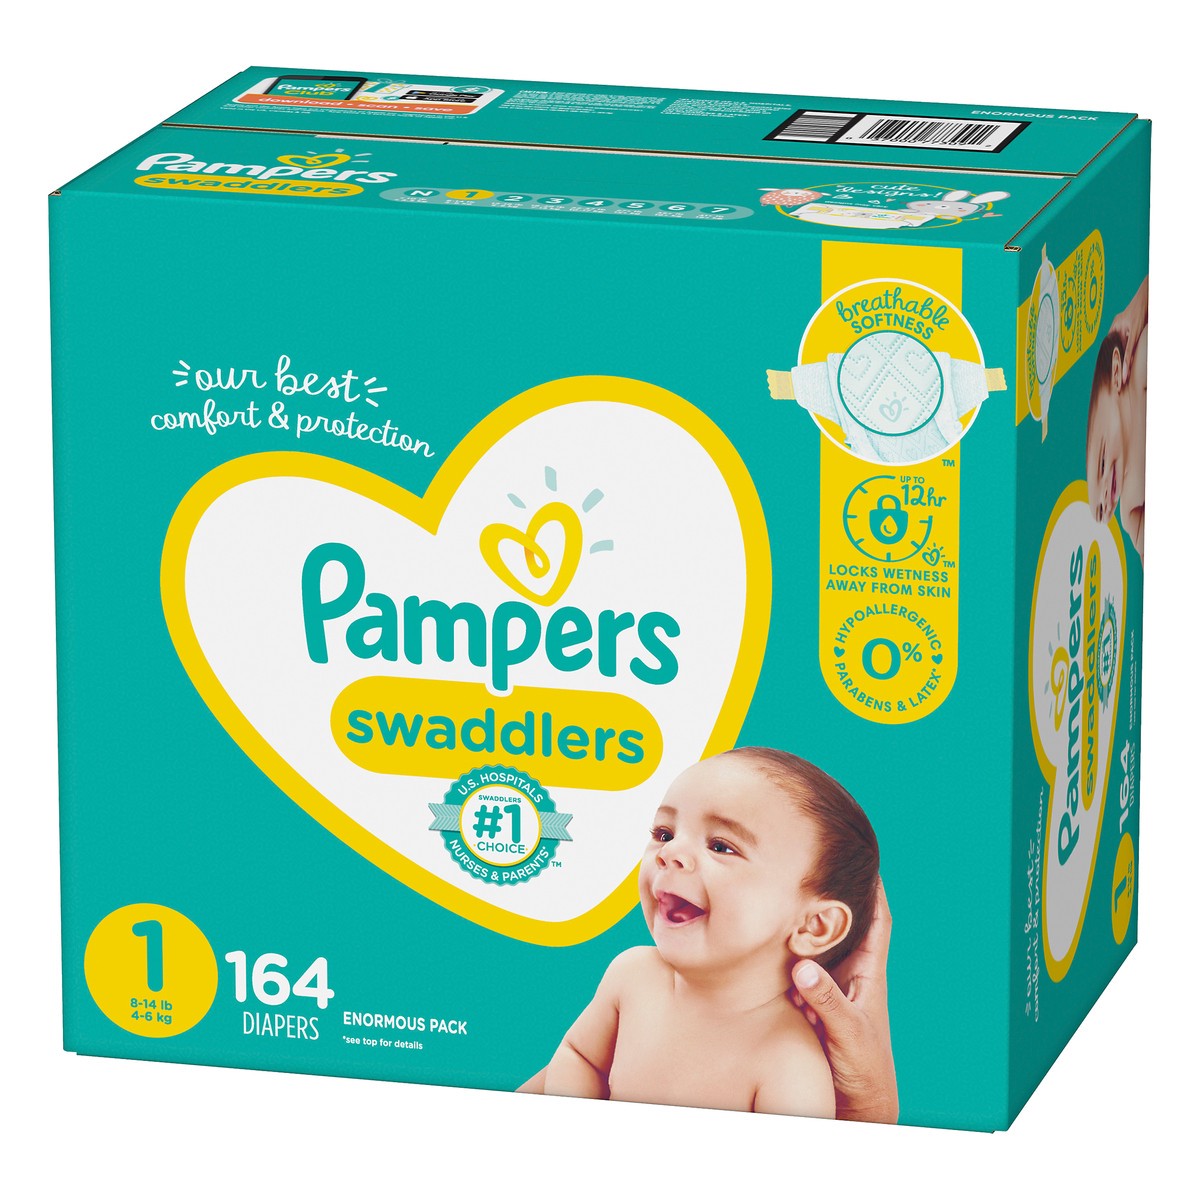 slide 4 of 6, Pampers Swaddlers Enormous Pack 1 (8-14 lb) Diapers 164 ea, 164 ct